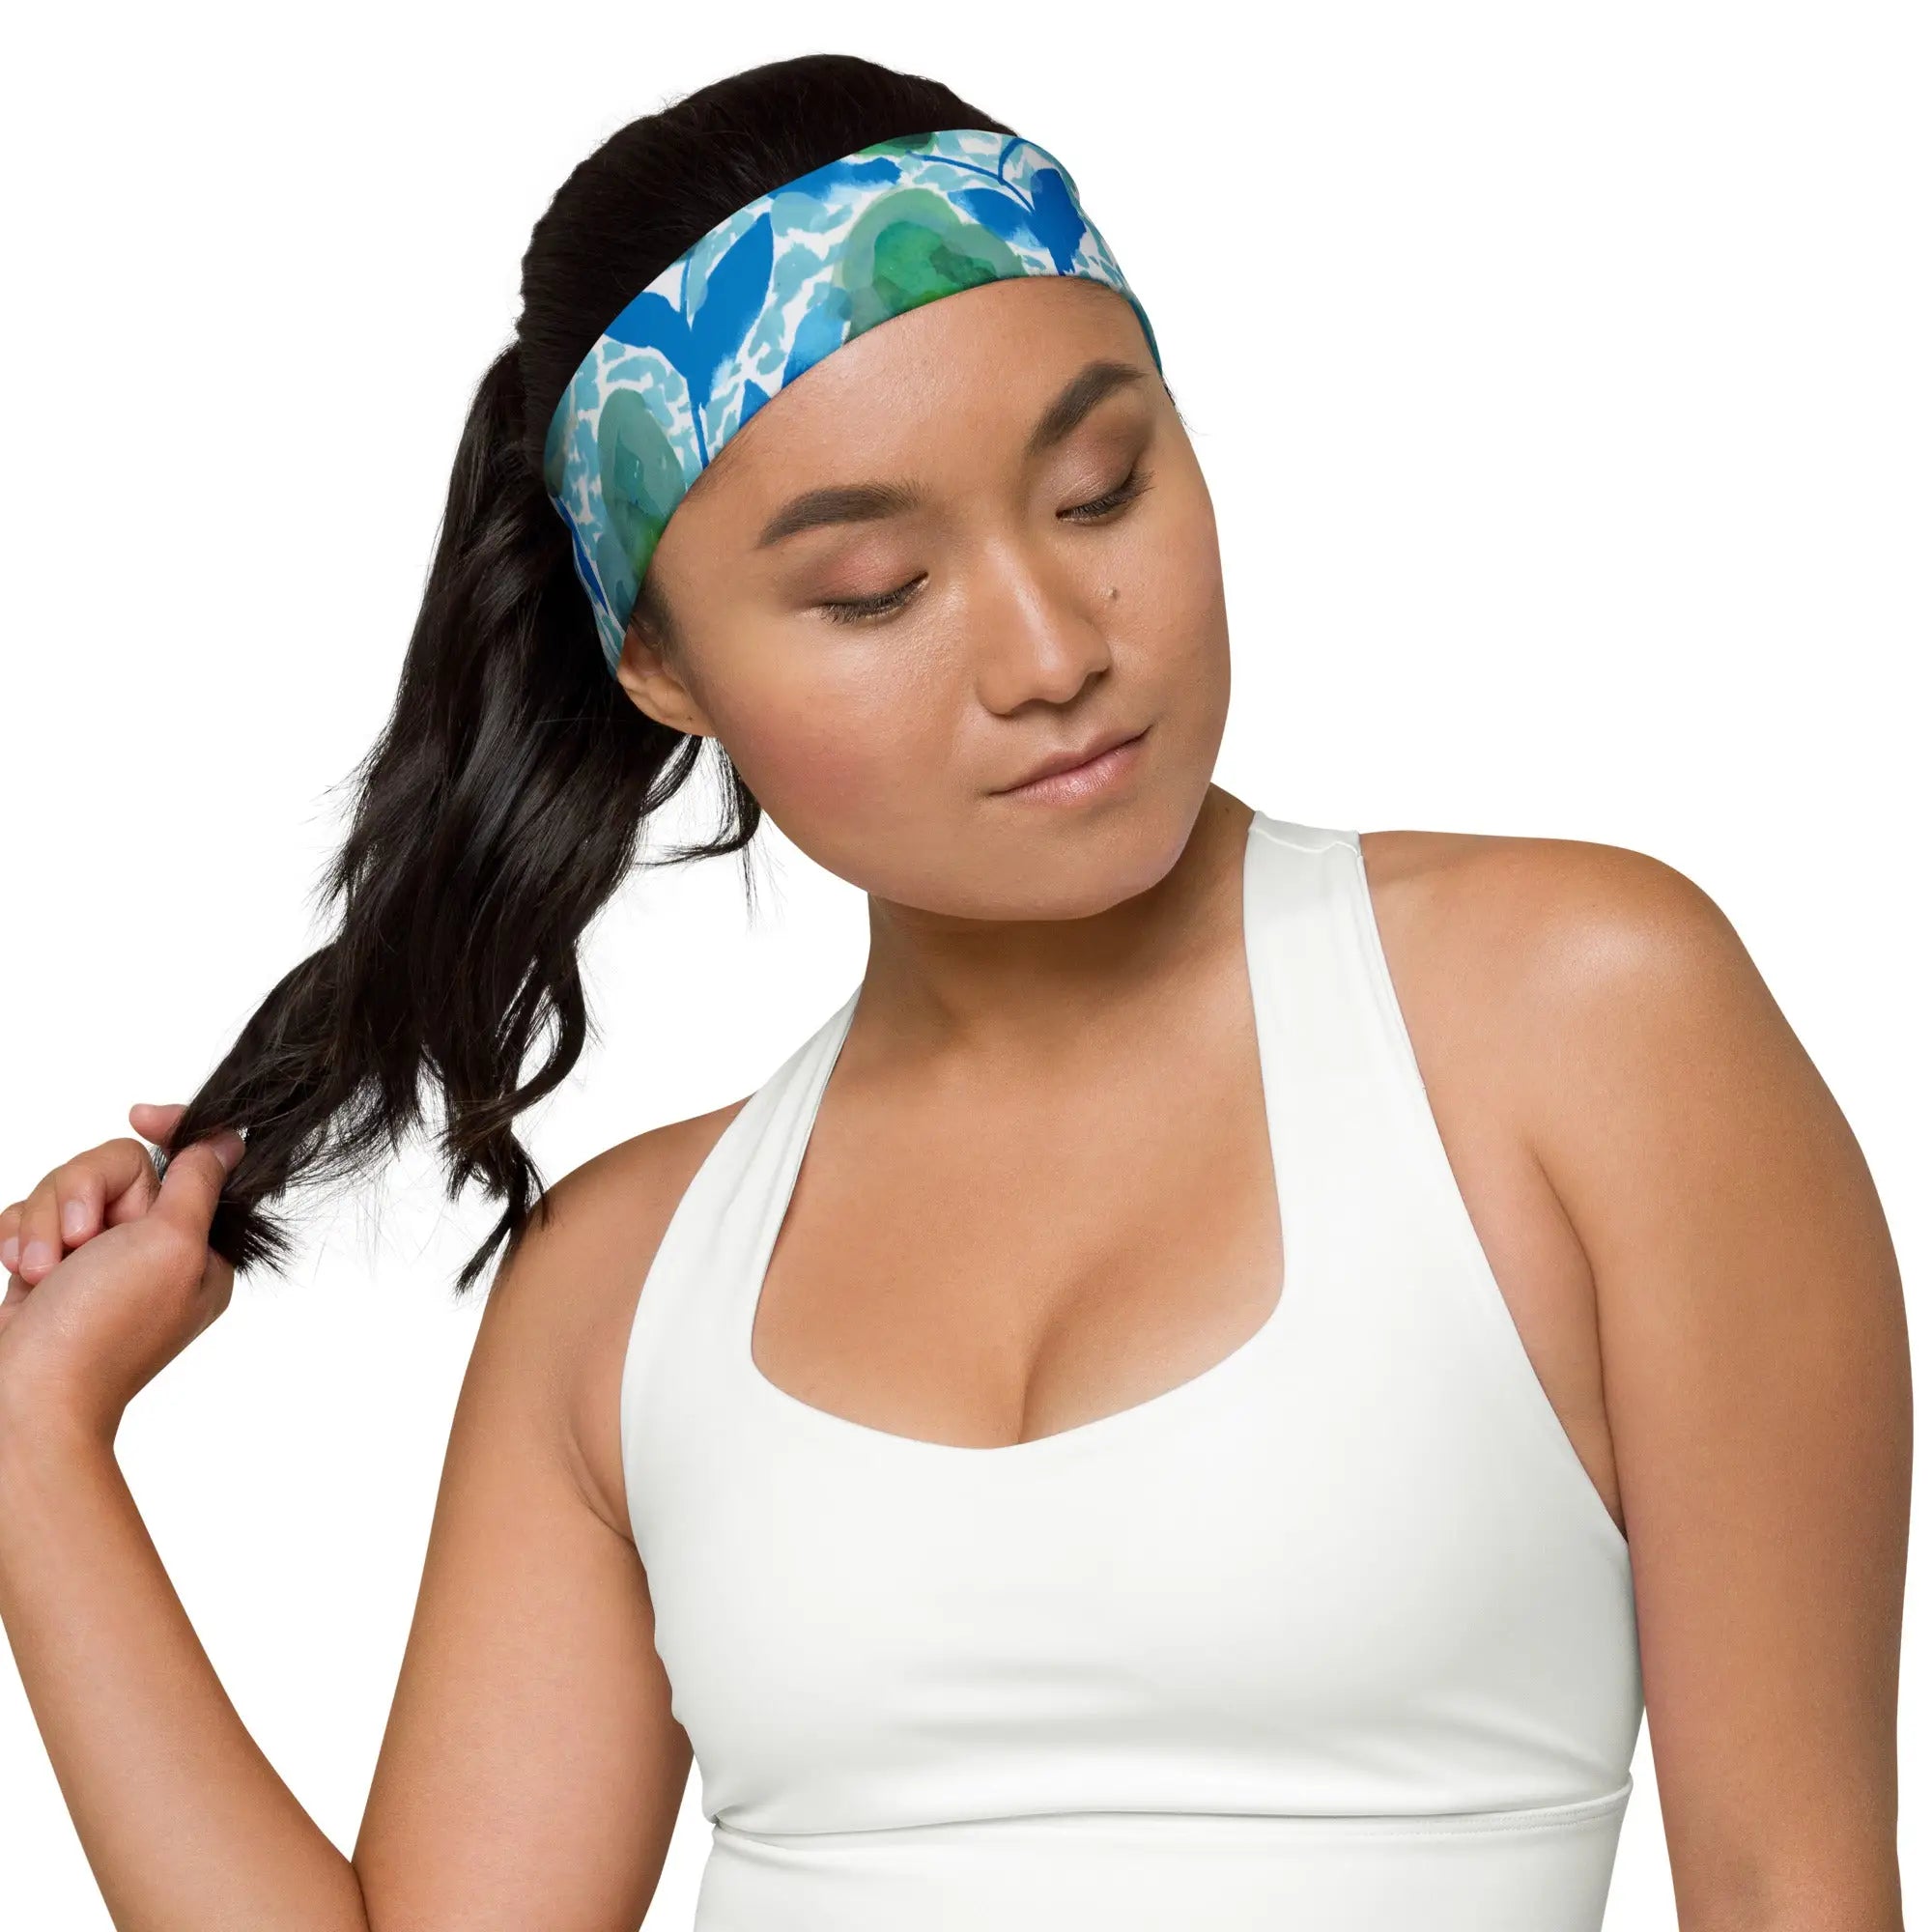 Woman wearing a blue and green floral fabric headband